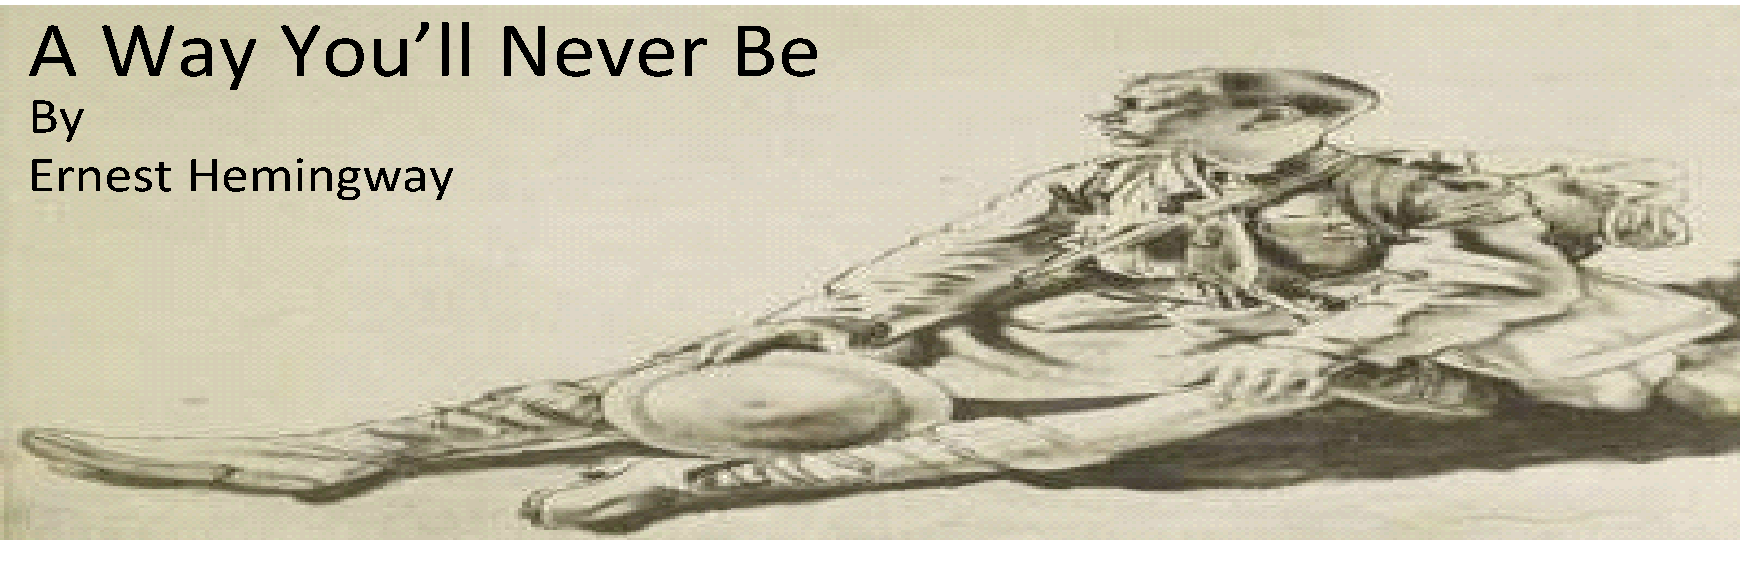 A Way You Will Never Be